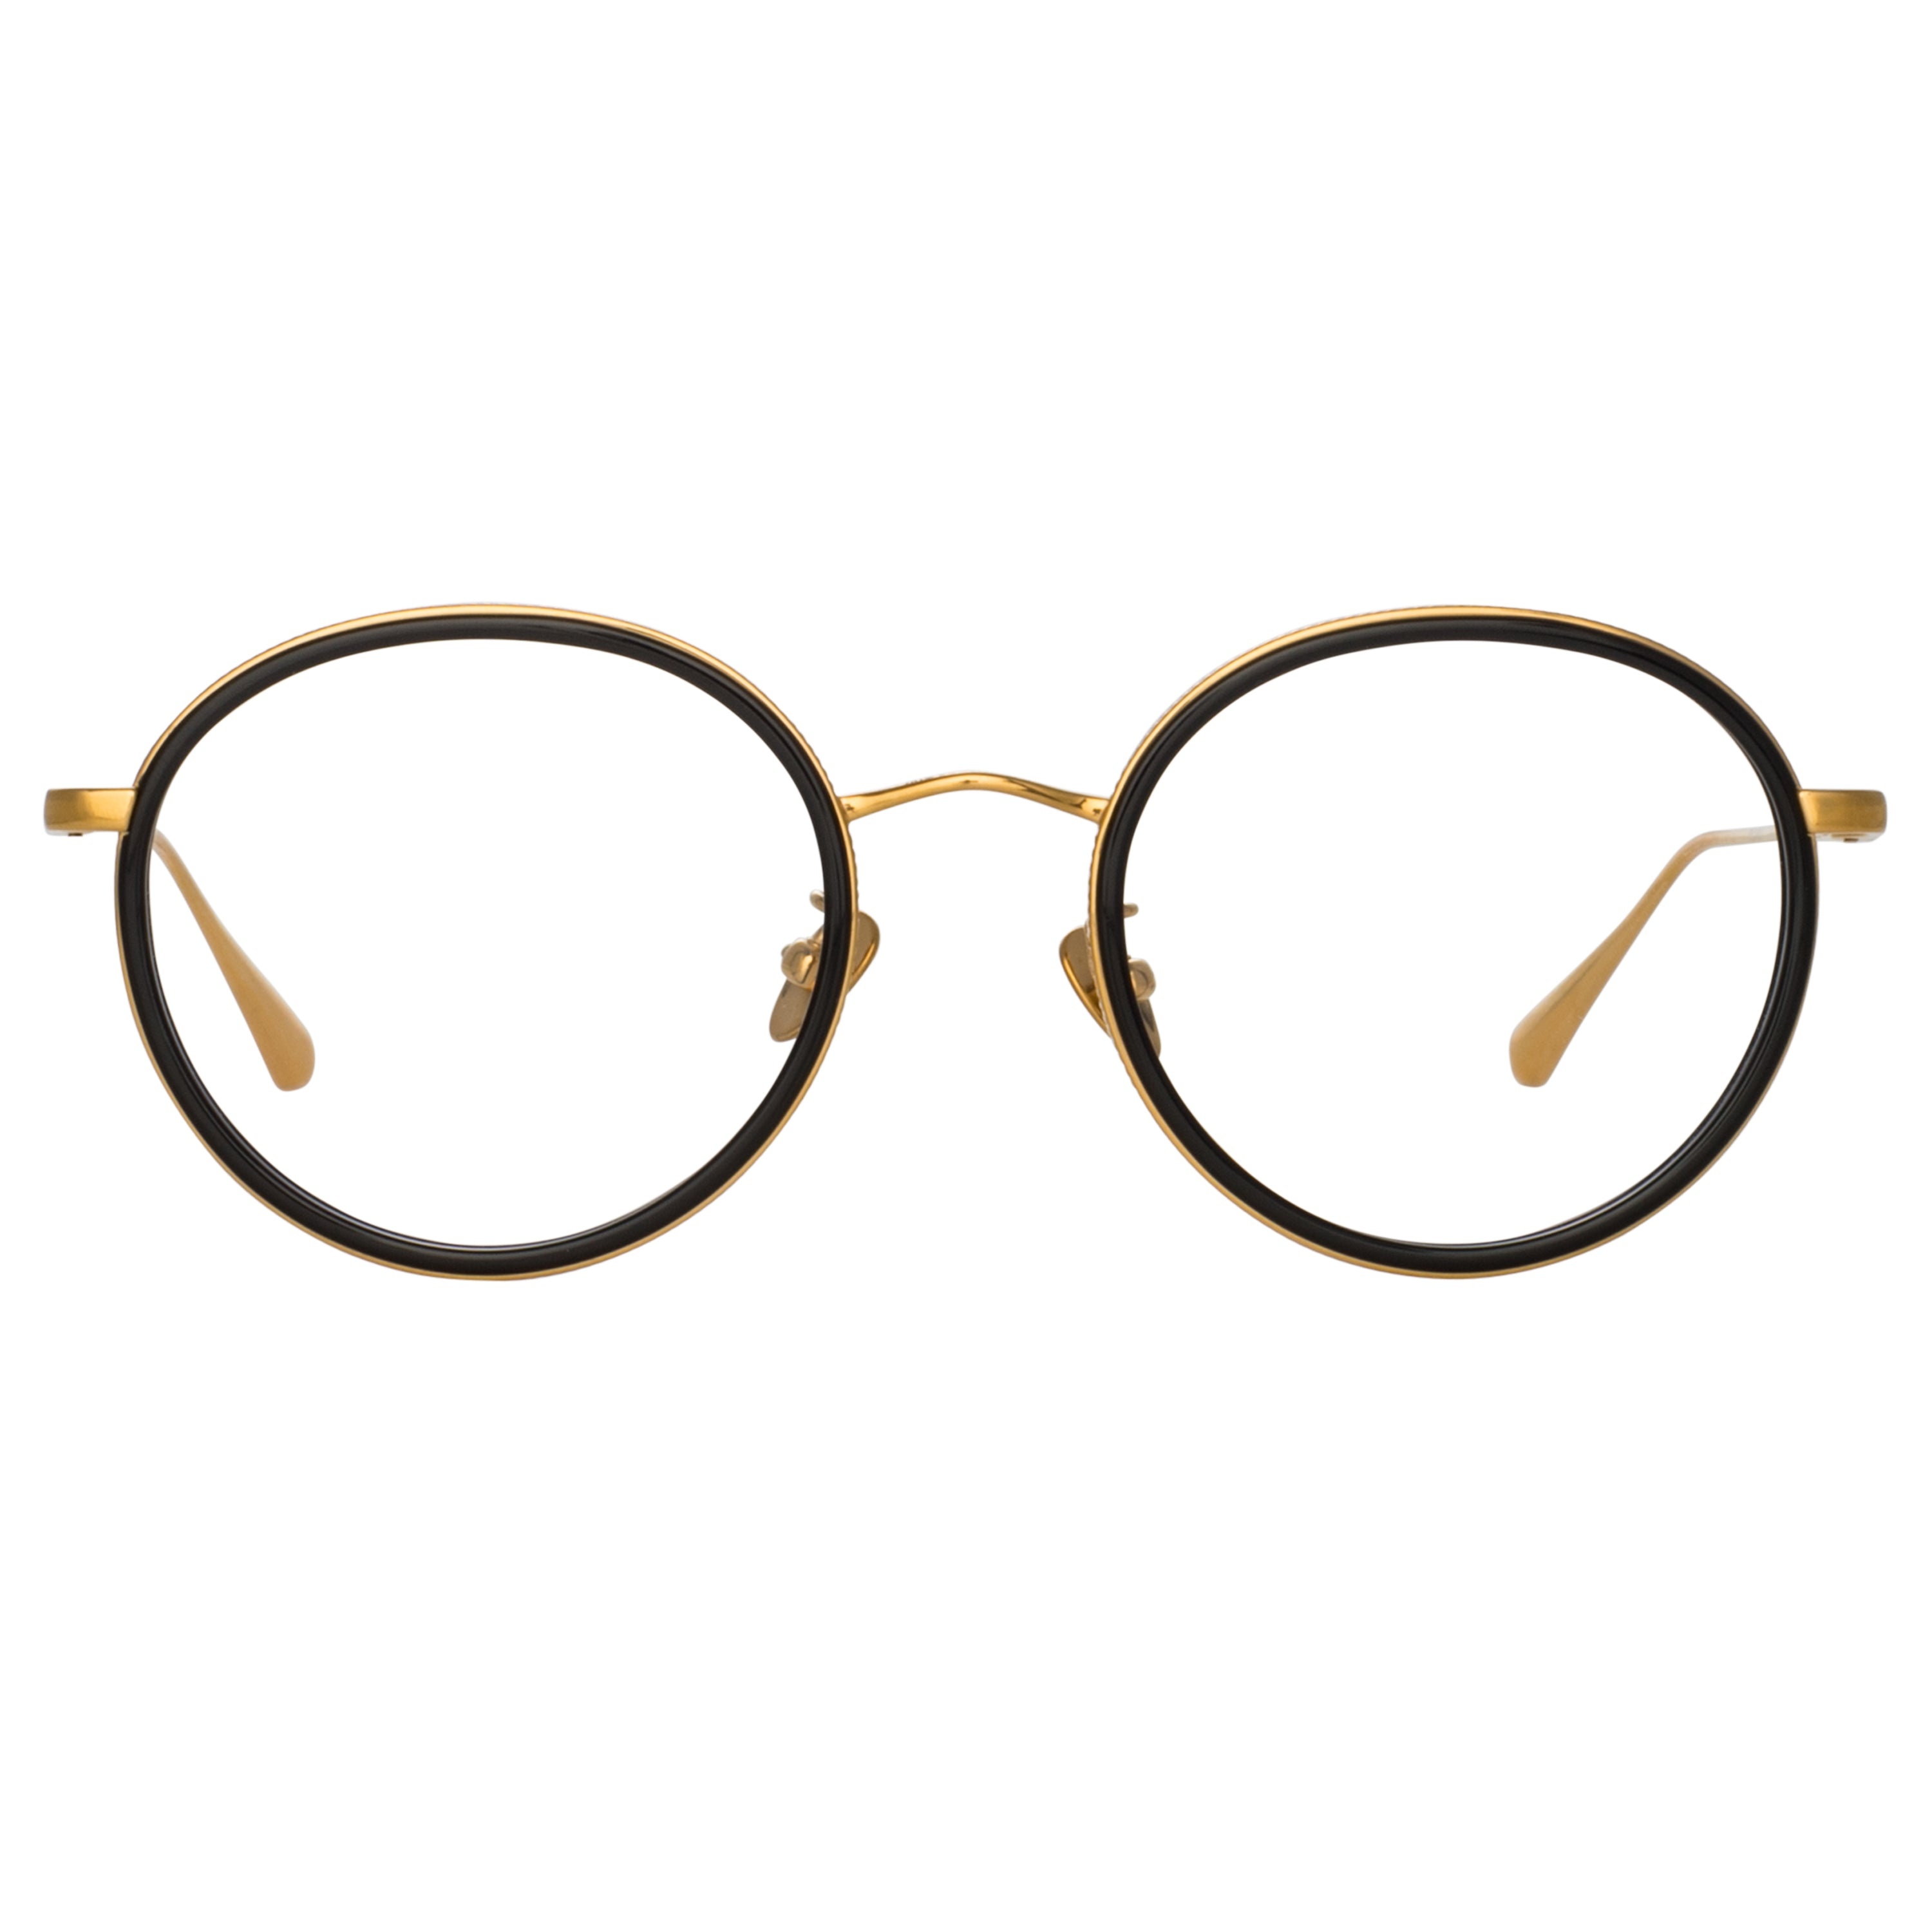 SATO OVAL OPTICAL FRAME IN YELLOW GOLD - 1